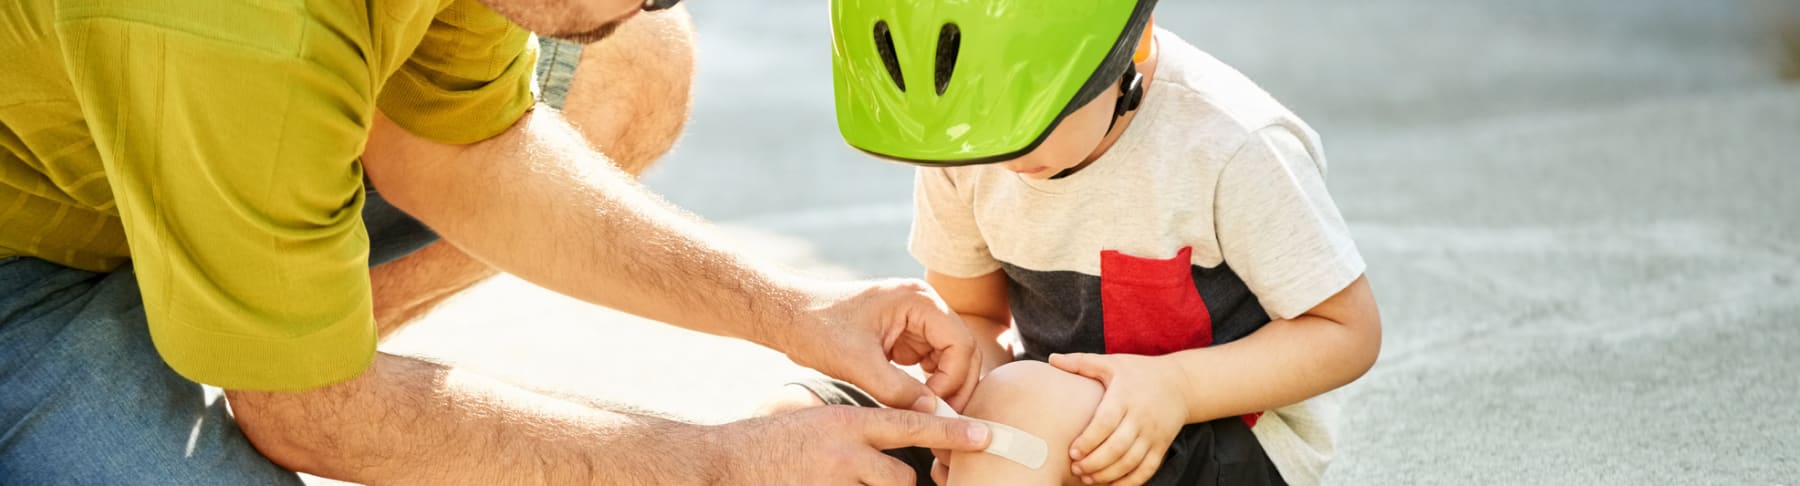 Father puts bandage on child's knee.